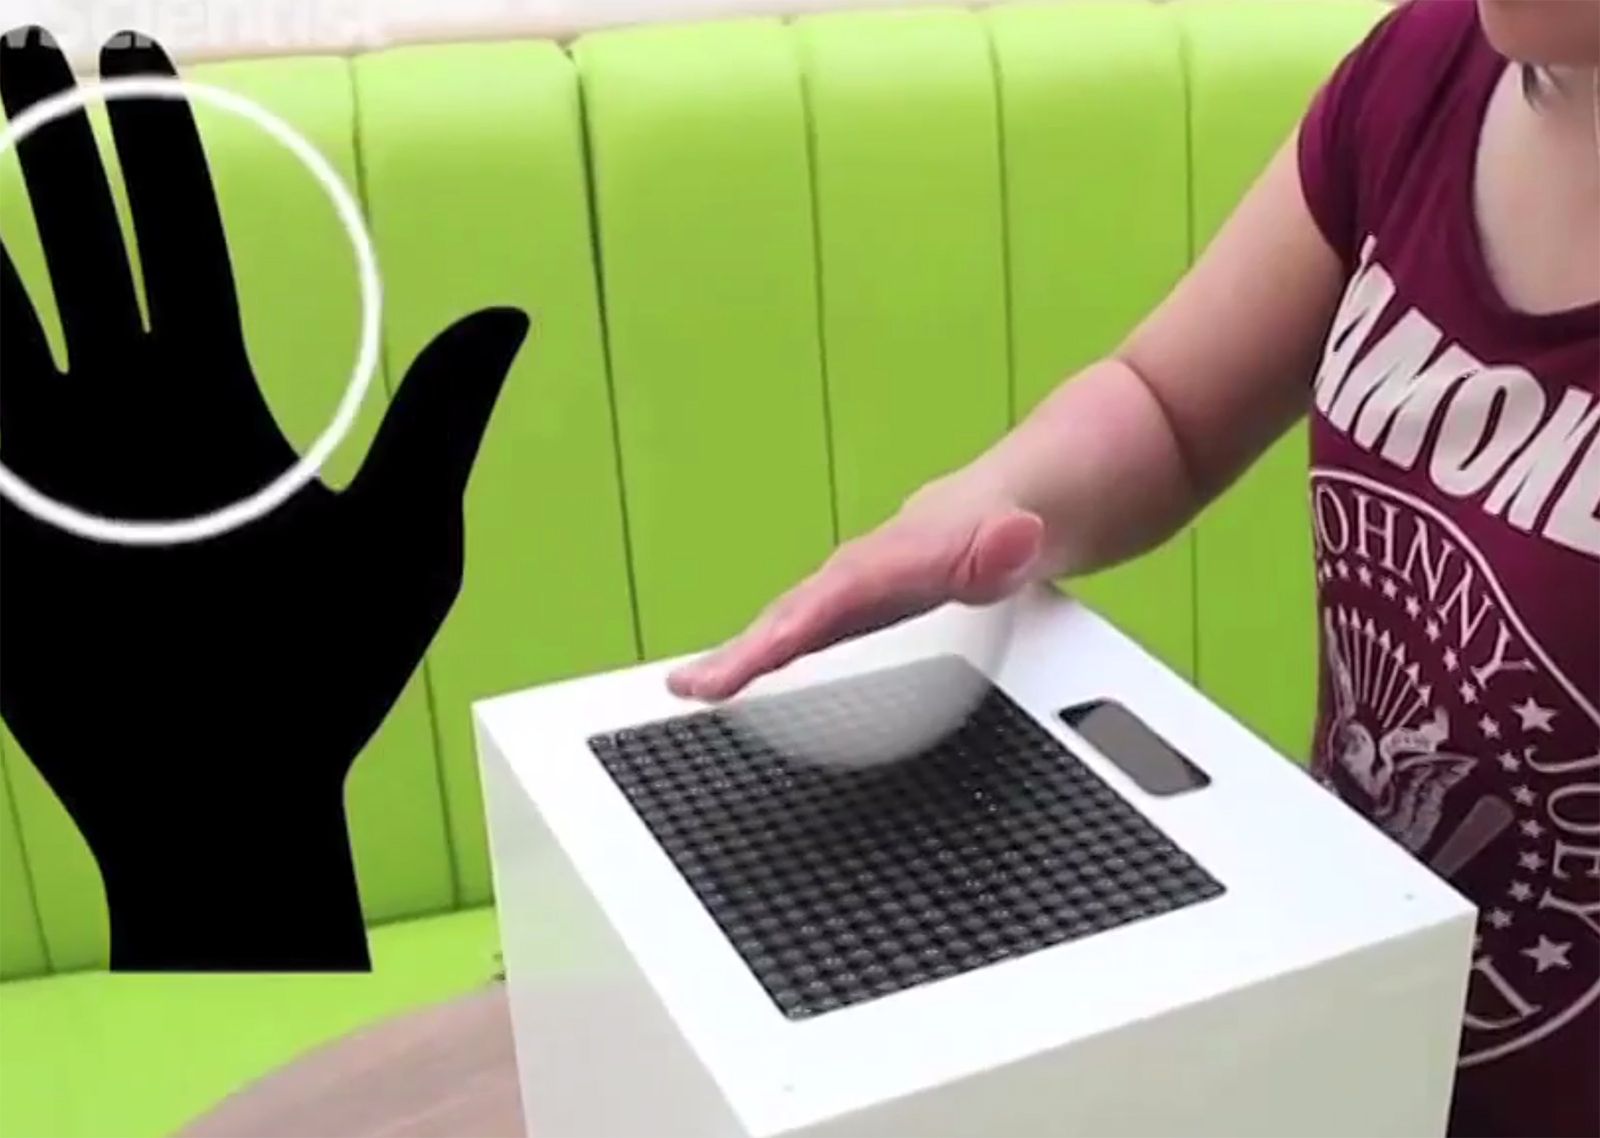 haptic hologram tech uses leap motion sensor to turn sound into 3d vr objects you can touch image 1